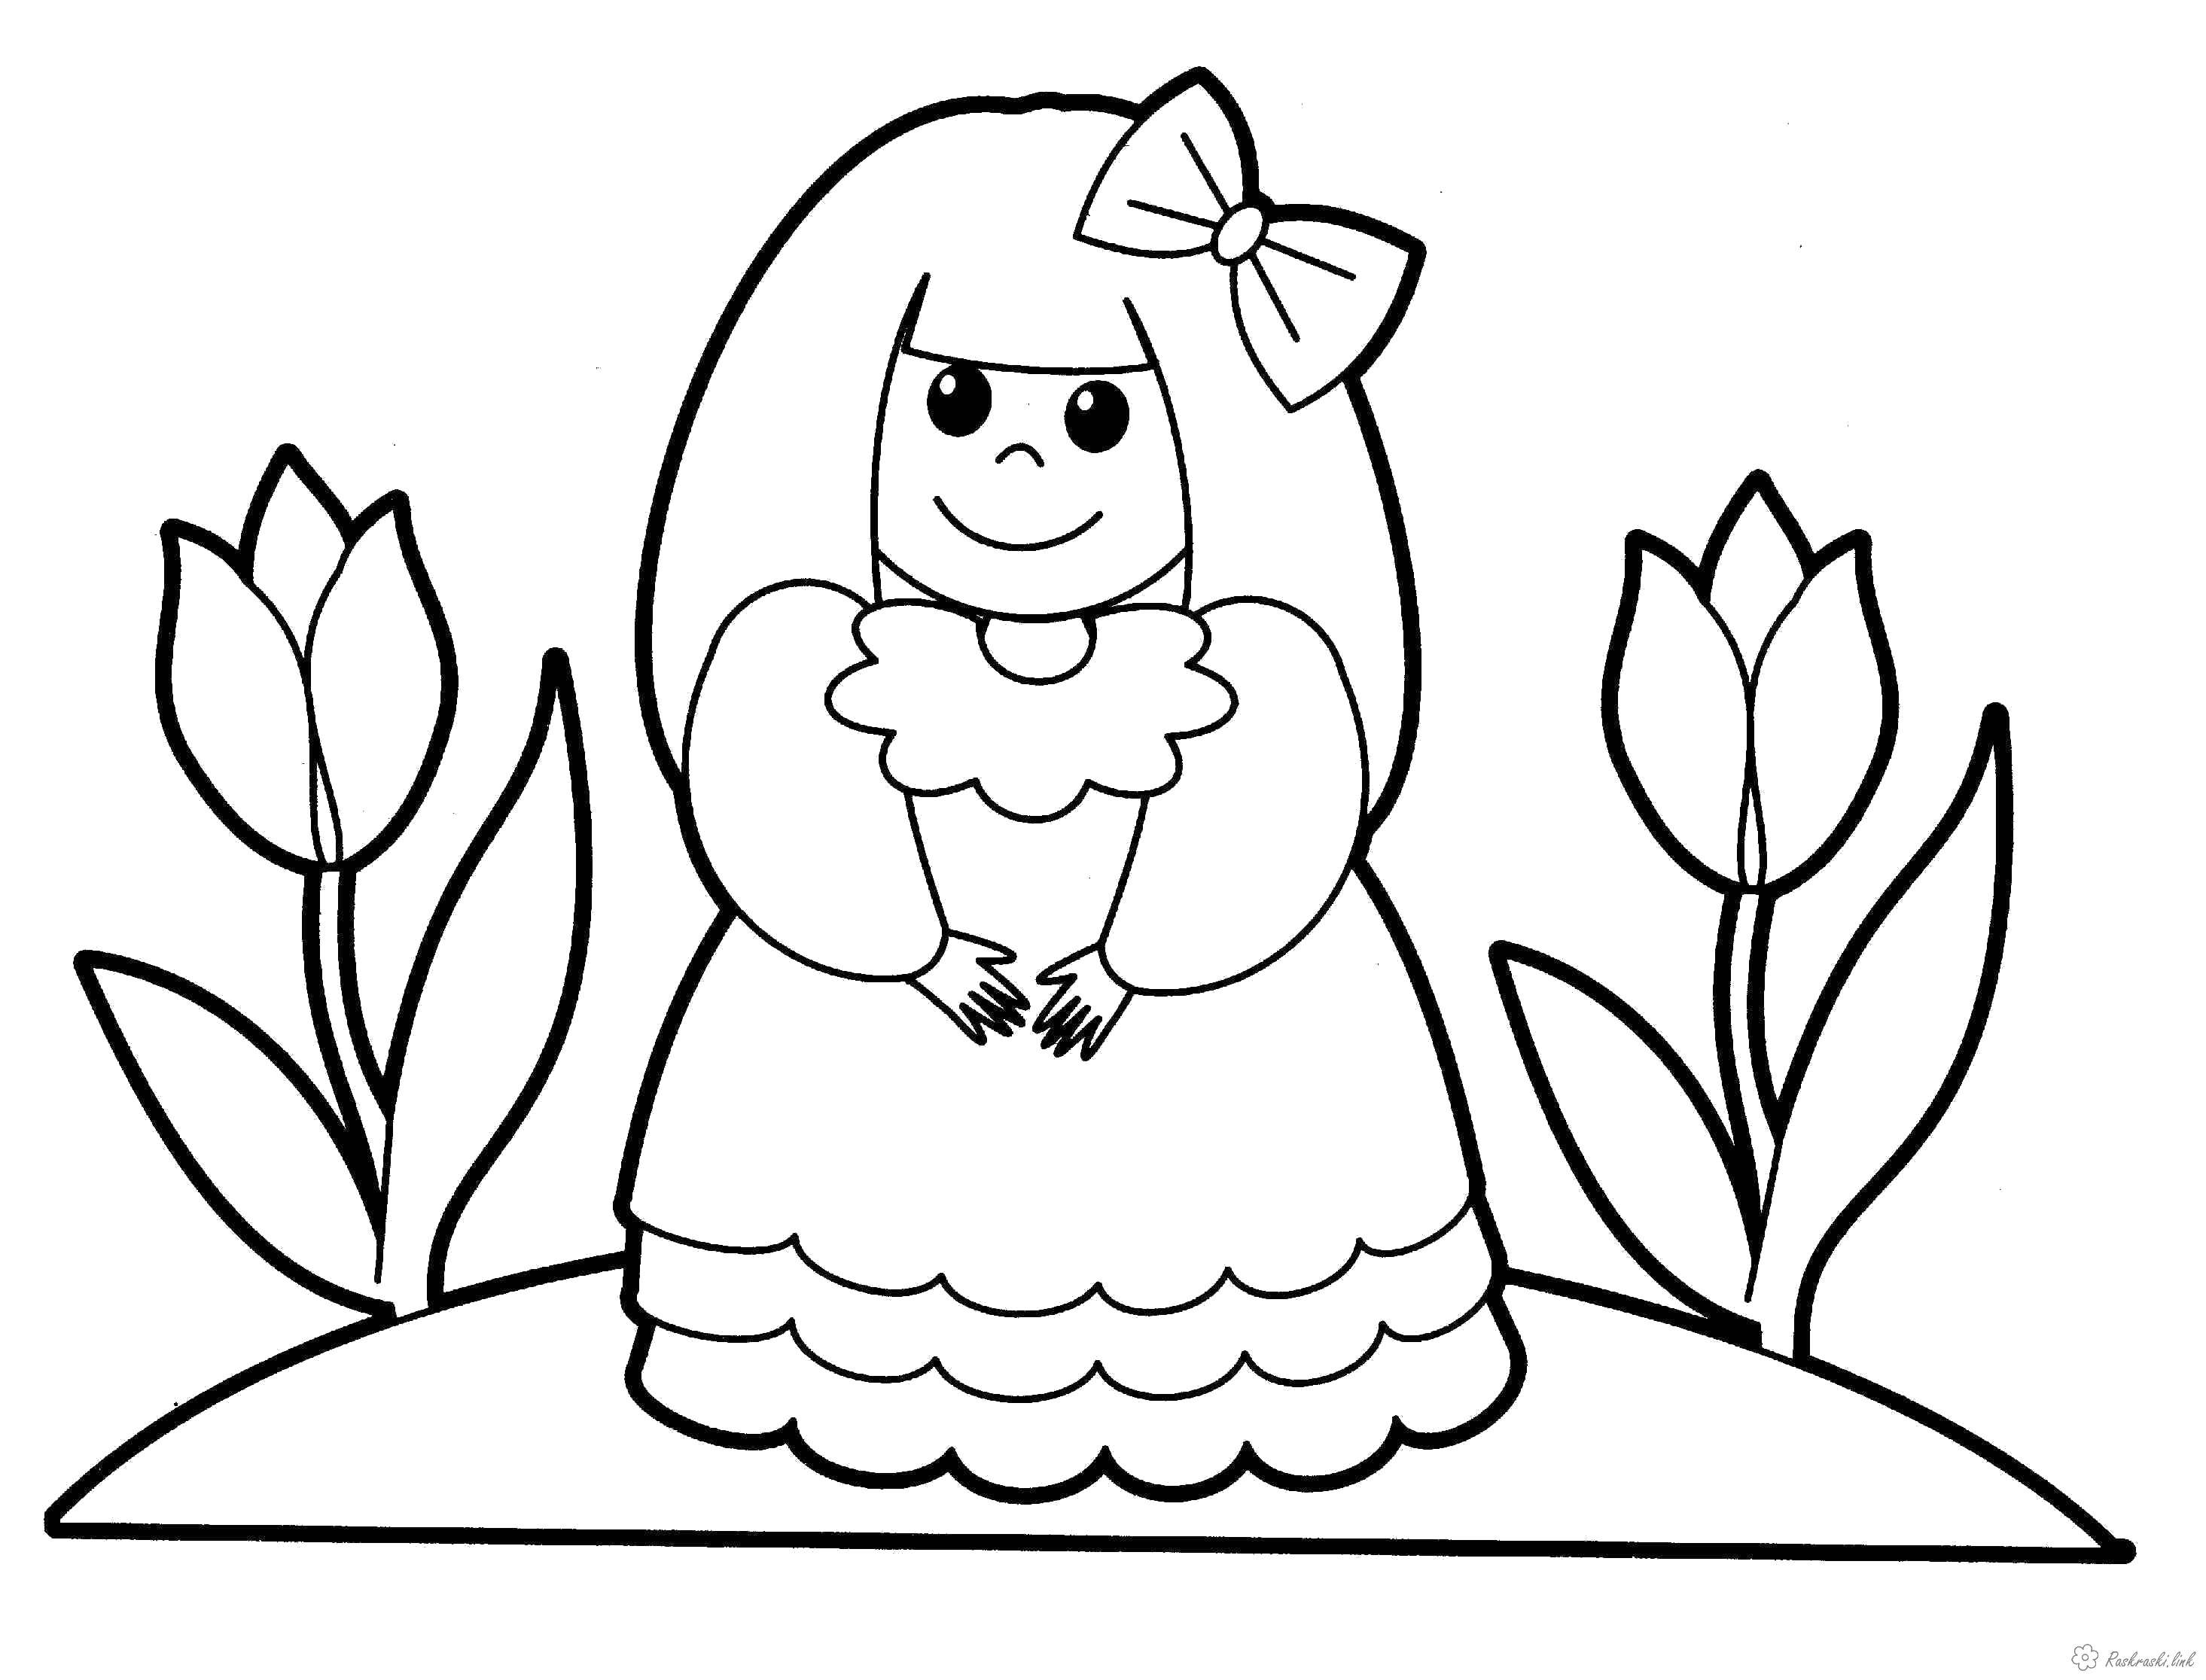 Coloring The girl at tulips. Category flowers. Tags:  Flowers, tulips.